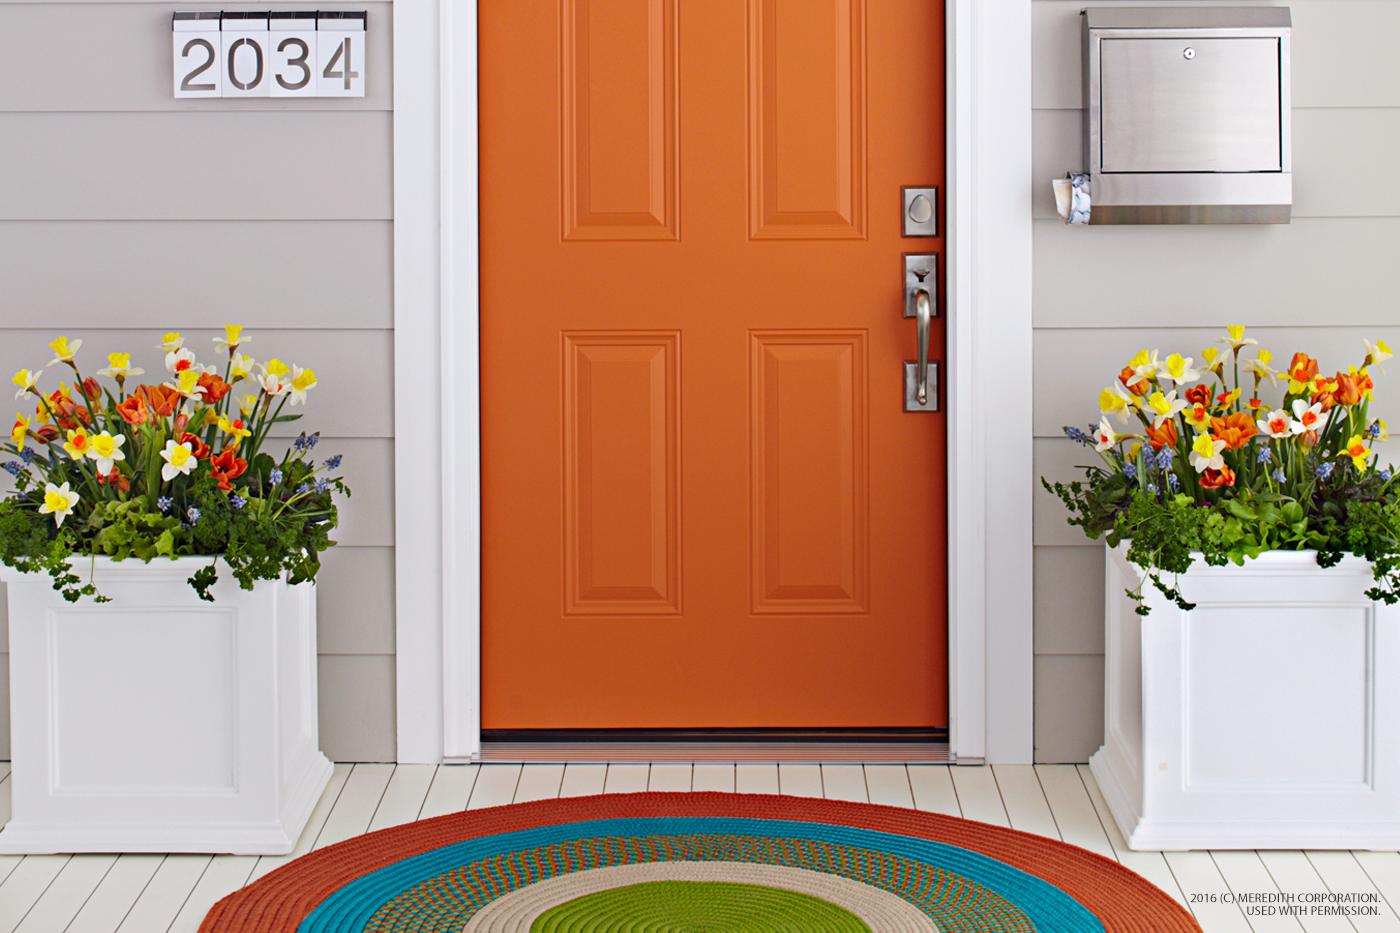 Allow Entryway Inspiration to Strike with These Fresh New Ideas - bhgrelife.com